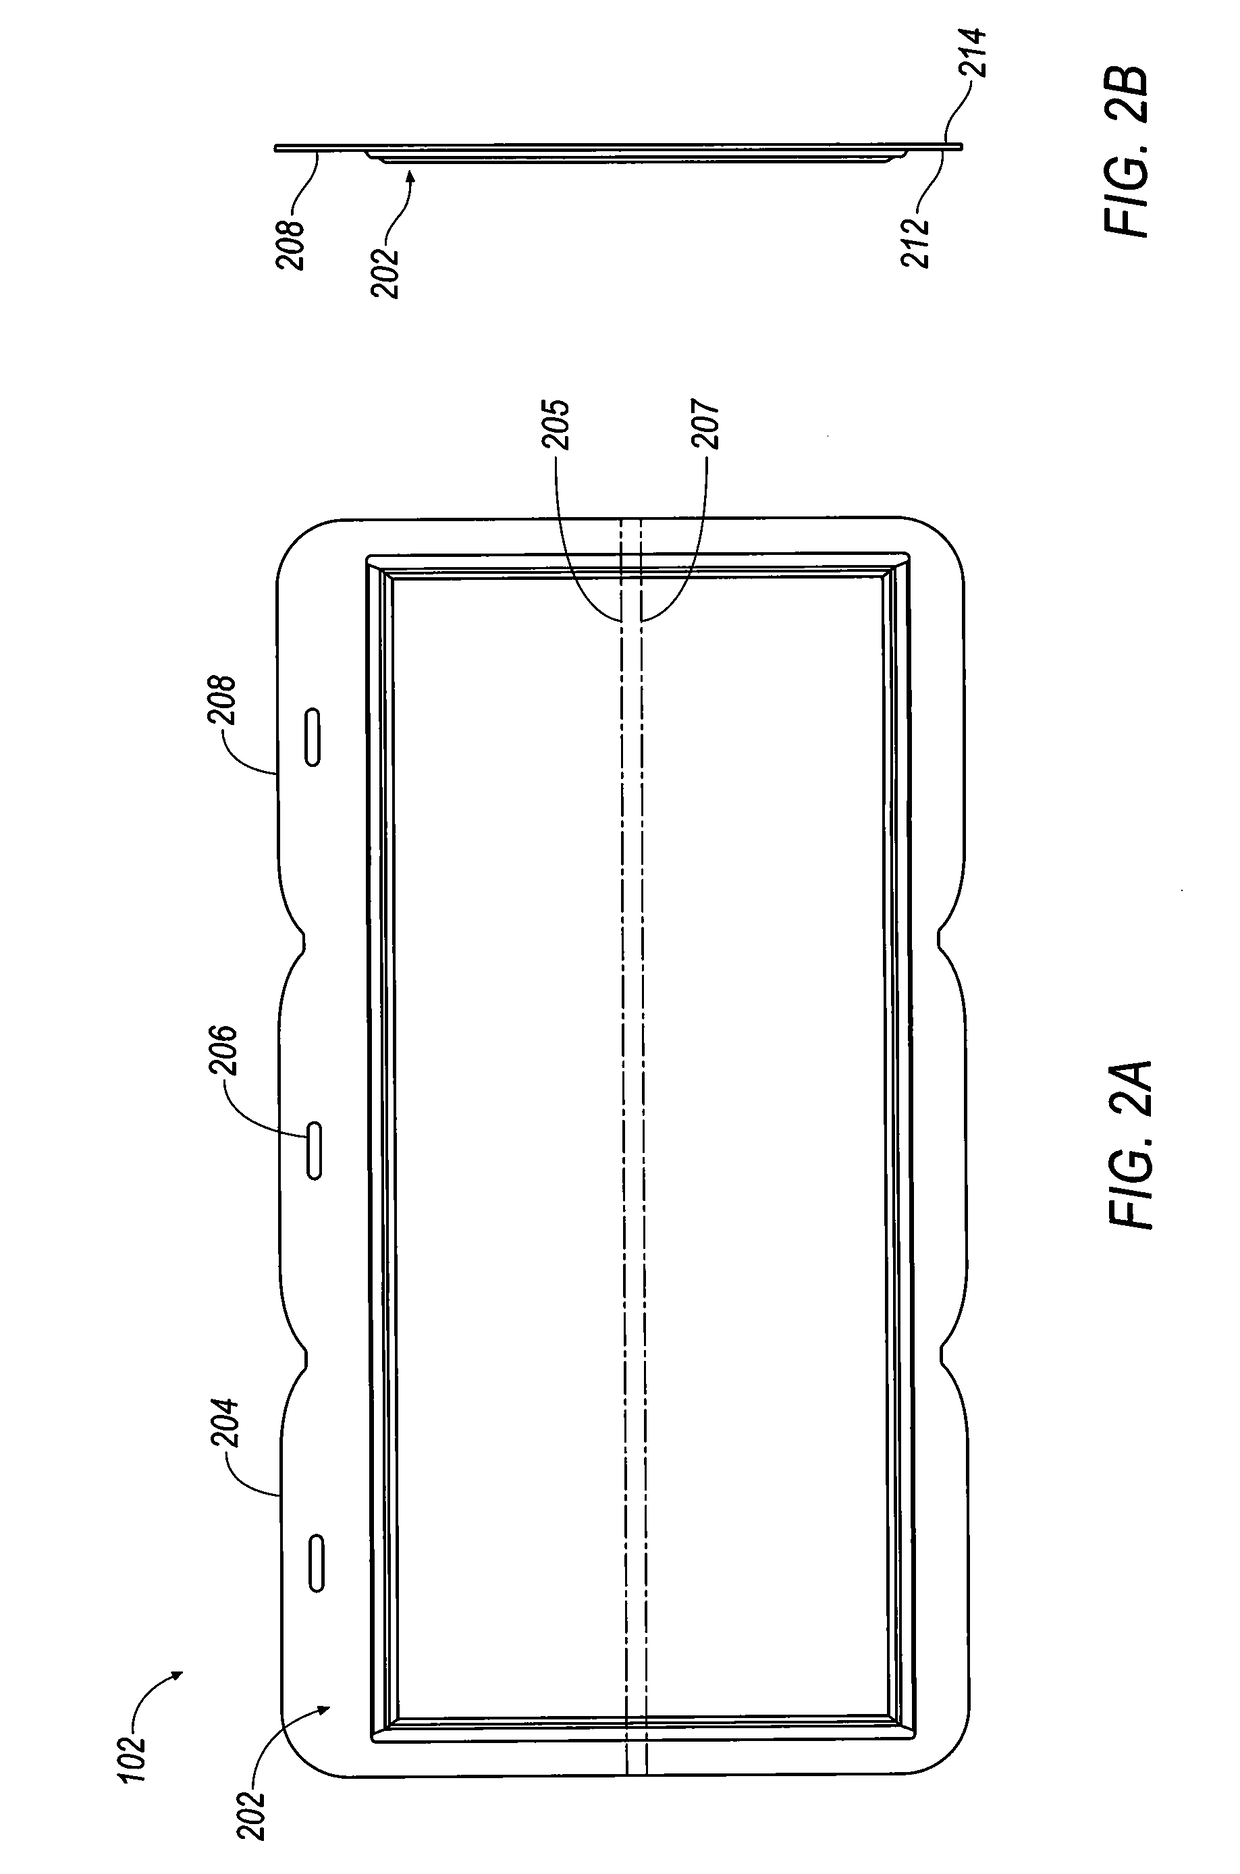 Electrolyte for rechargeable electrochemical cell